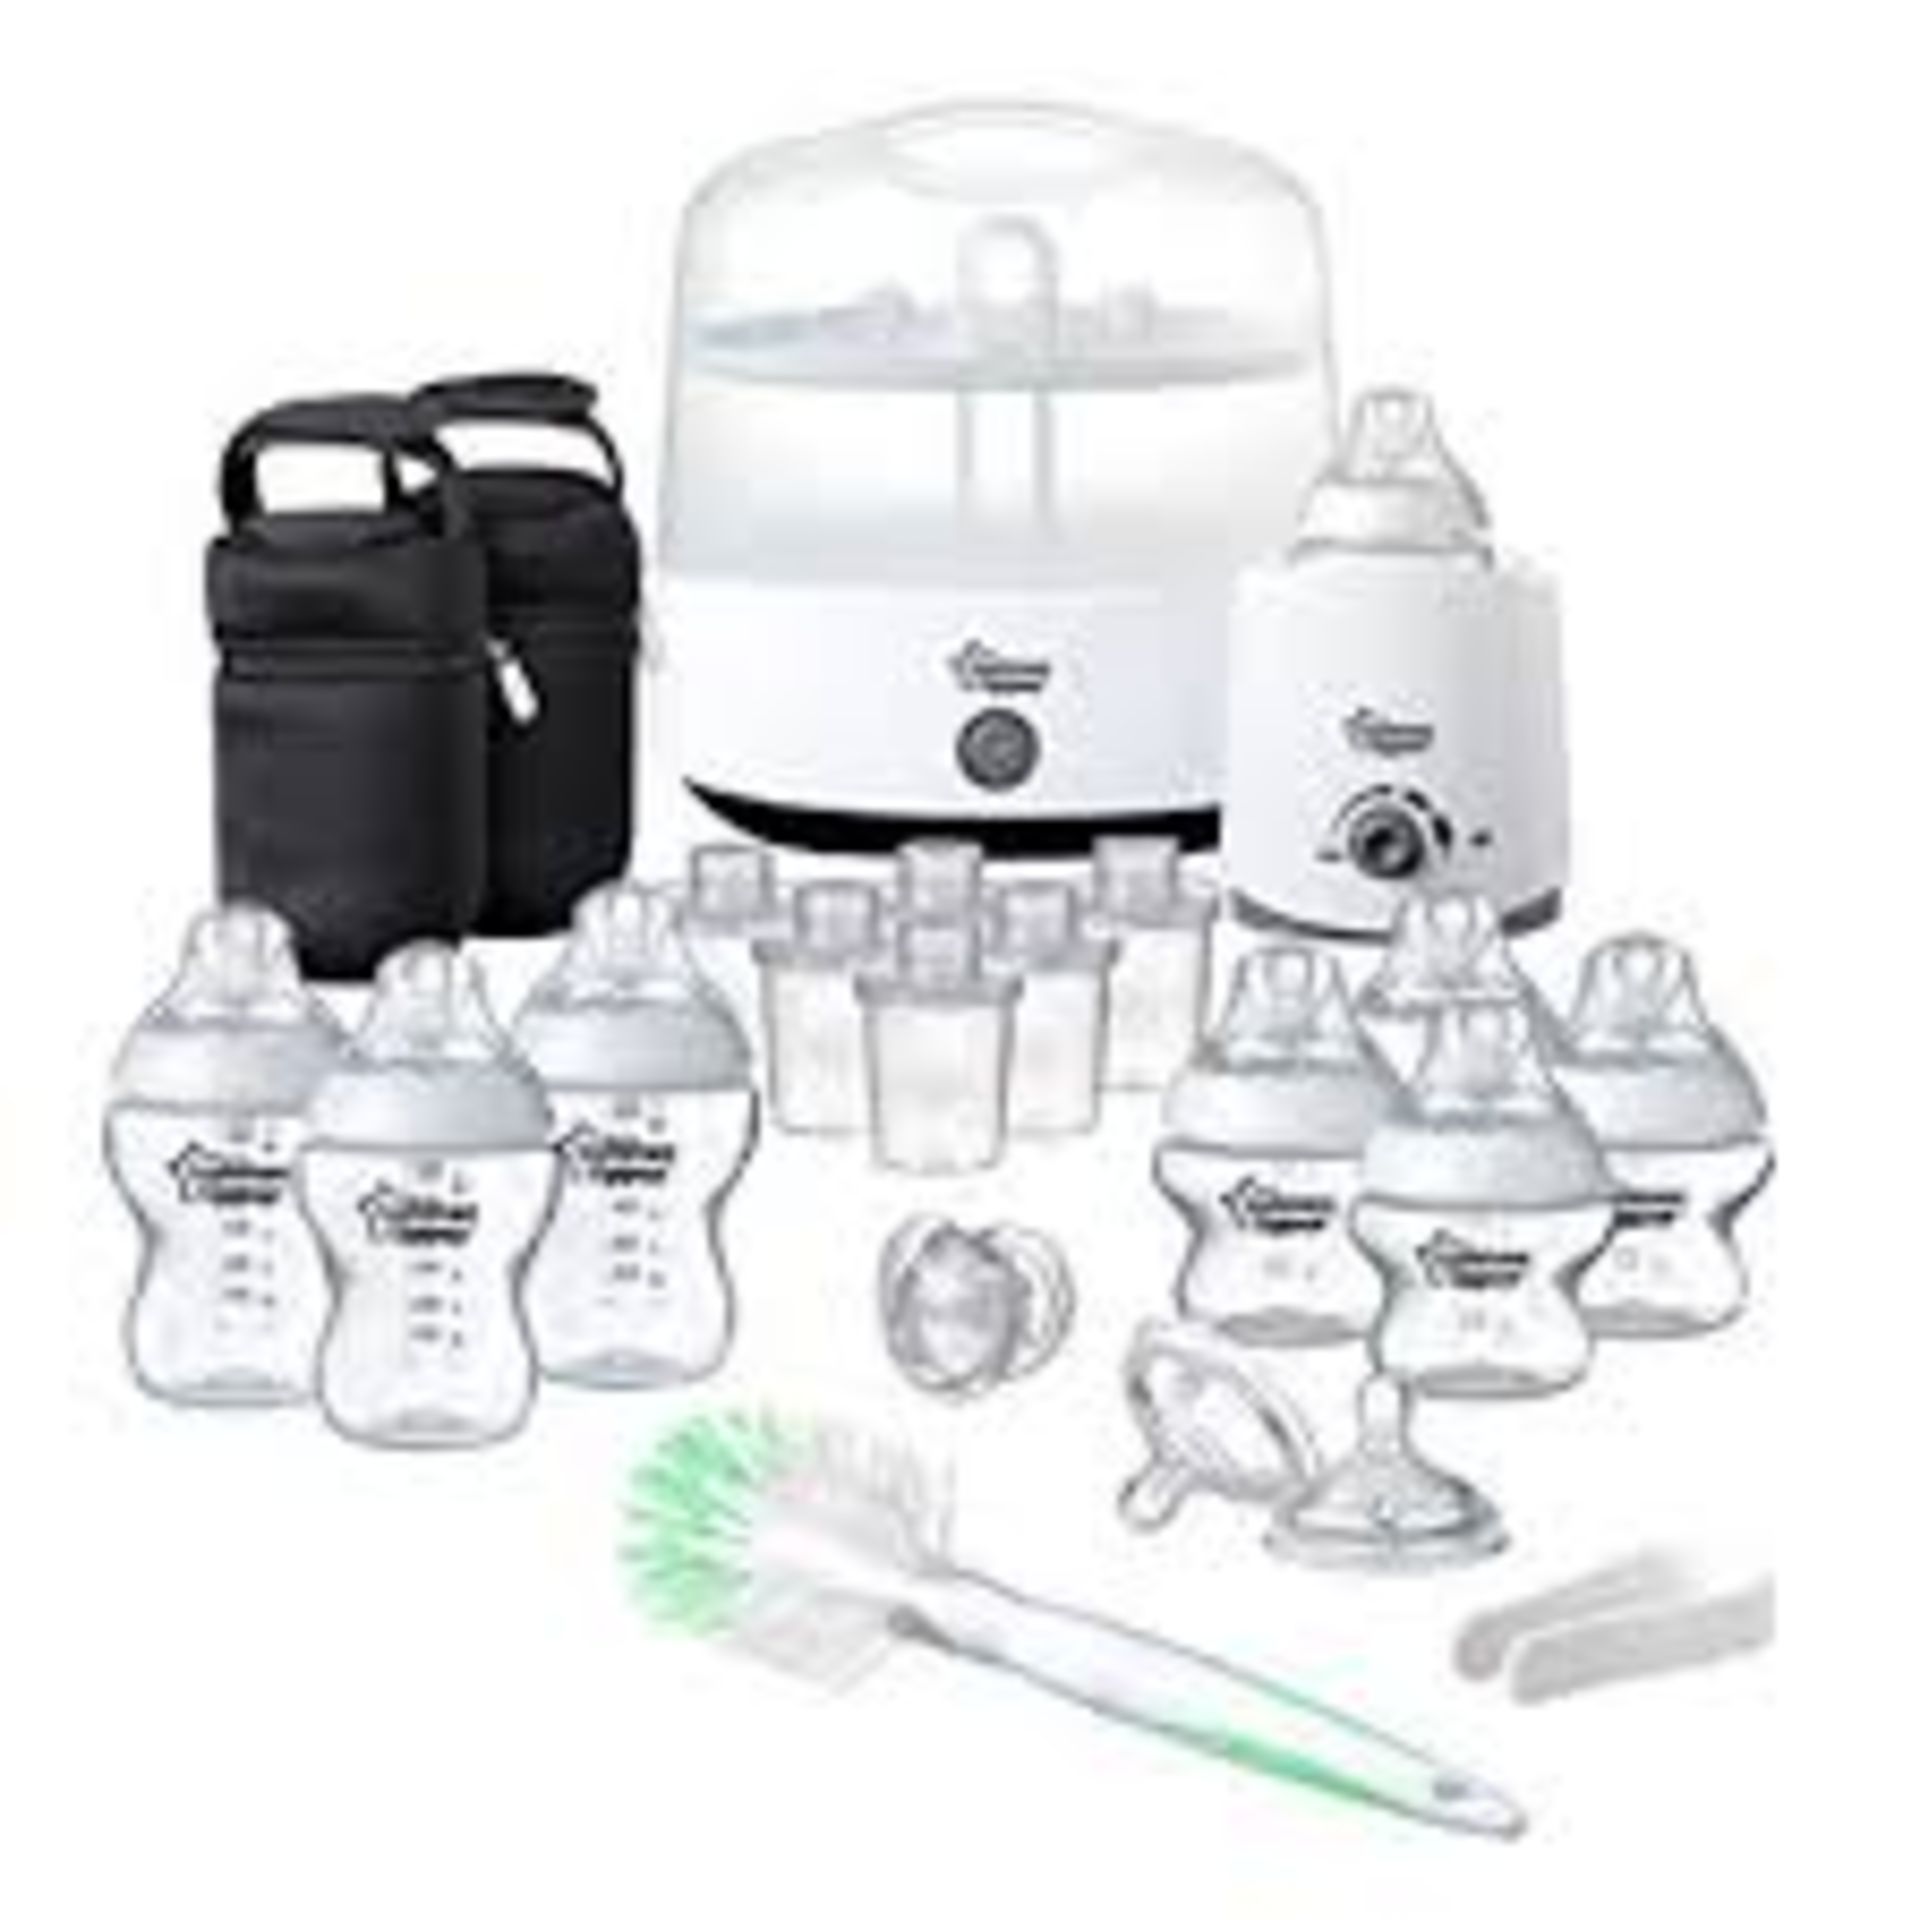 Boxed Tommee Tippee Closer To Nature Complete Feeding Set RRP £65.00 (Retoo240693) (Public Viewing